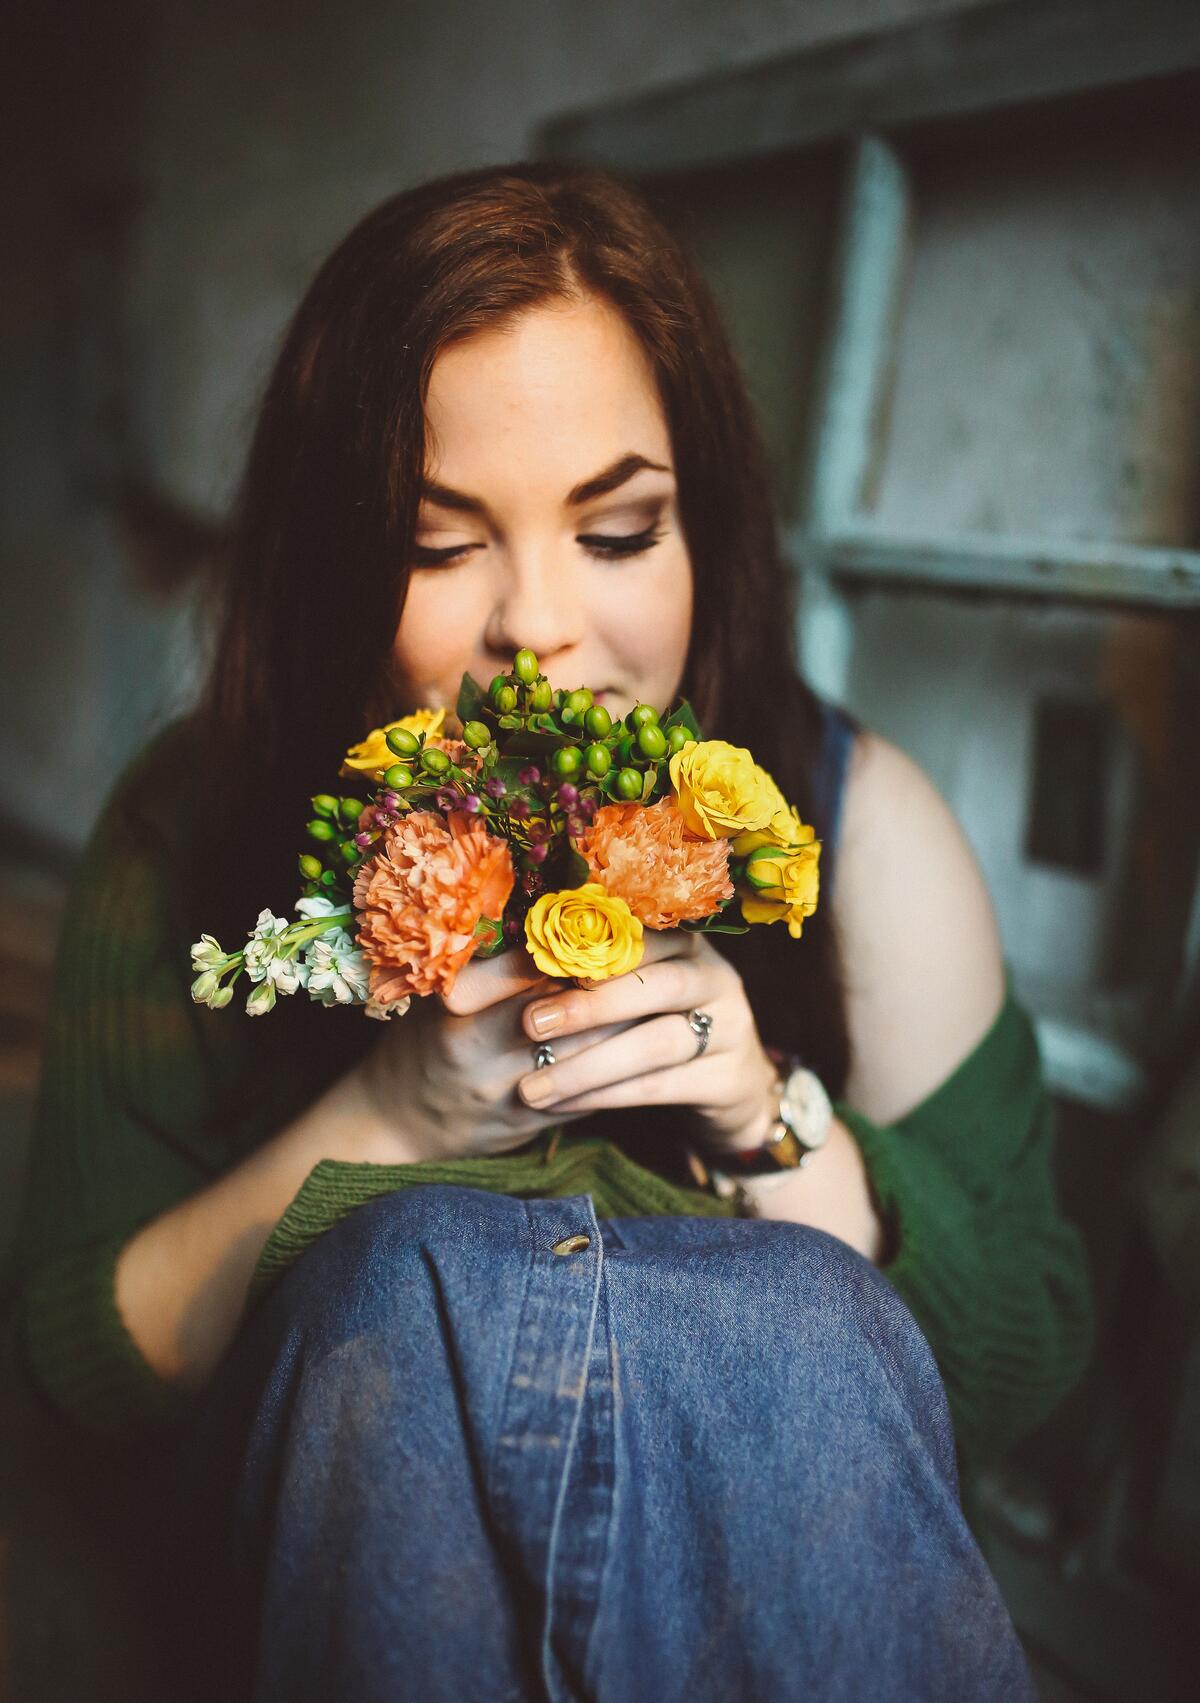 Dark-haired girl admiring a bouquet of flowers